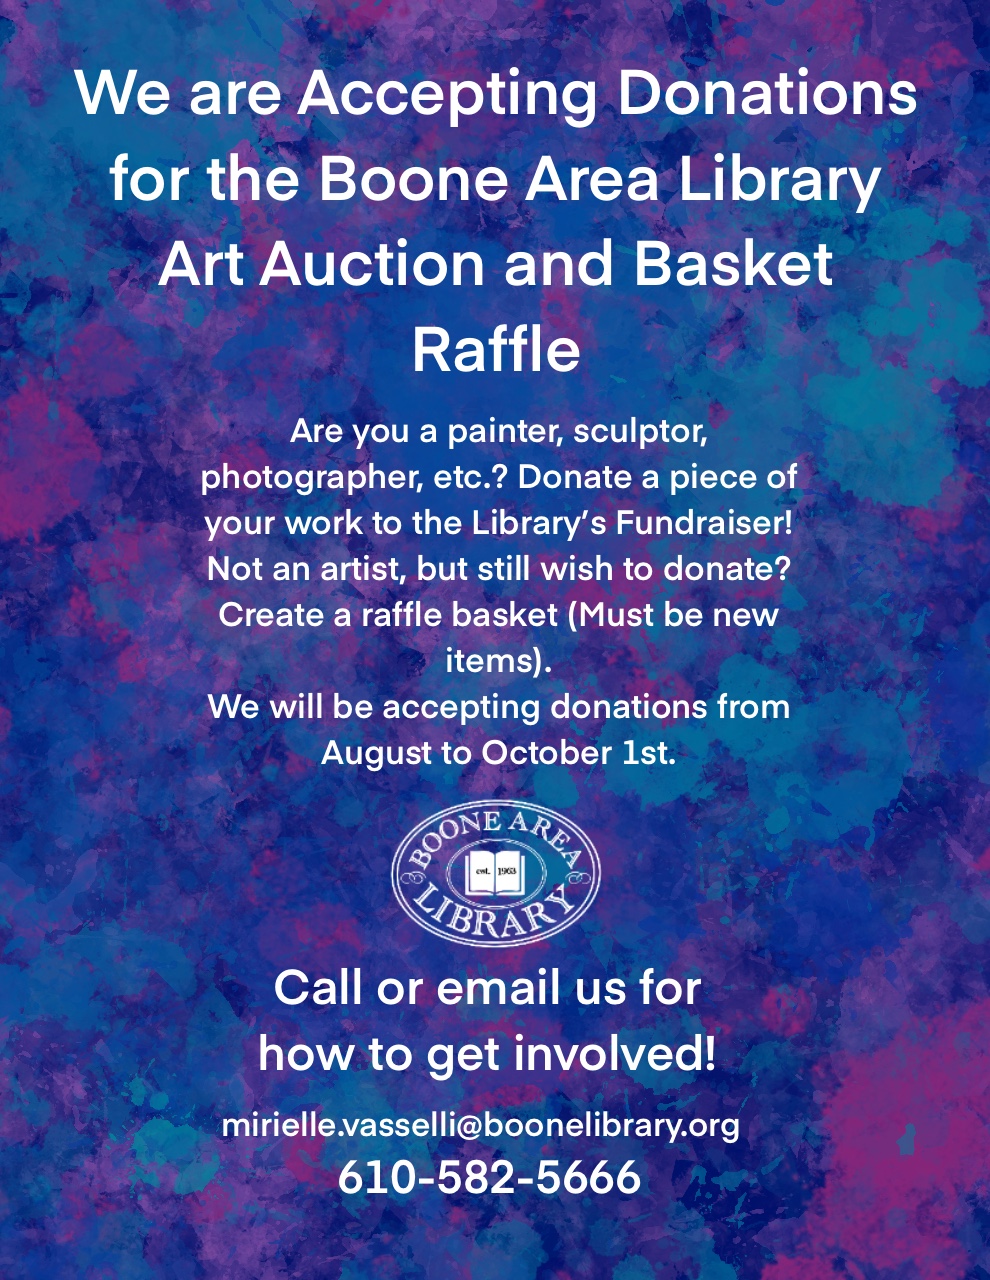 Flyer asking for donations for art auction and basket raffle 